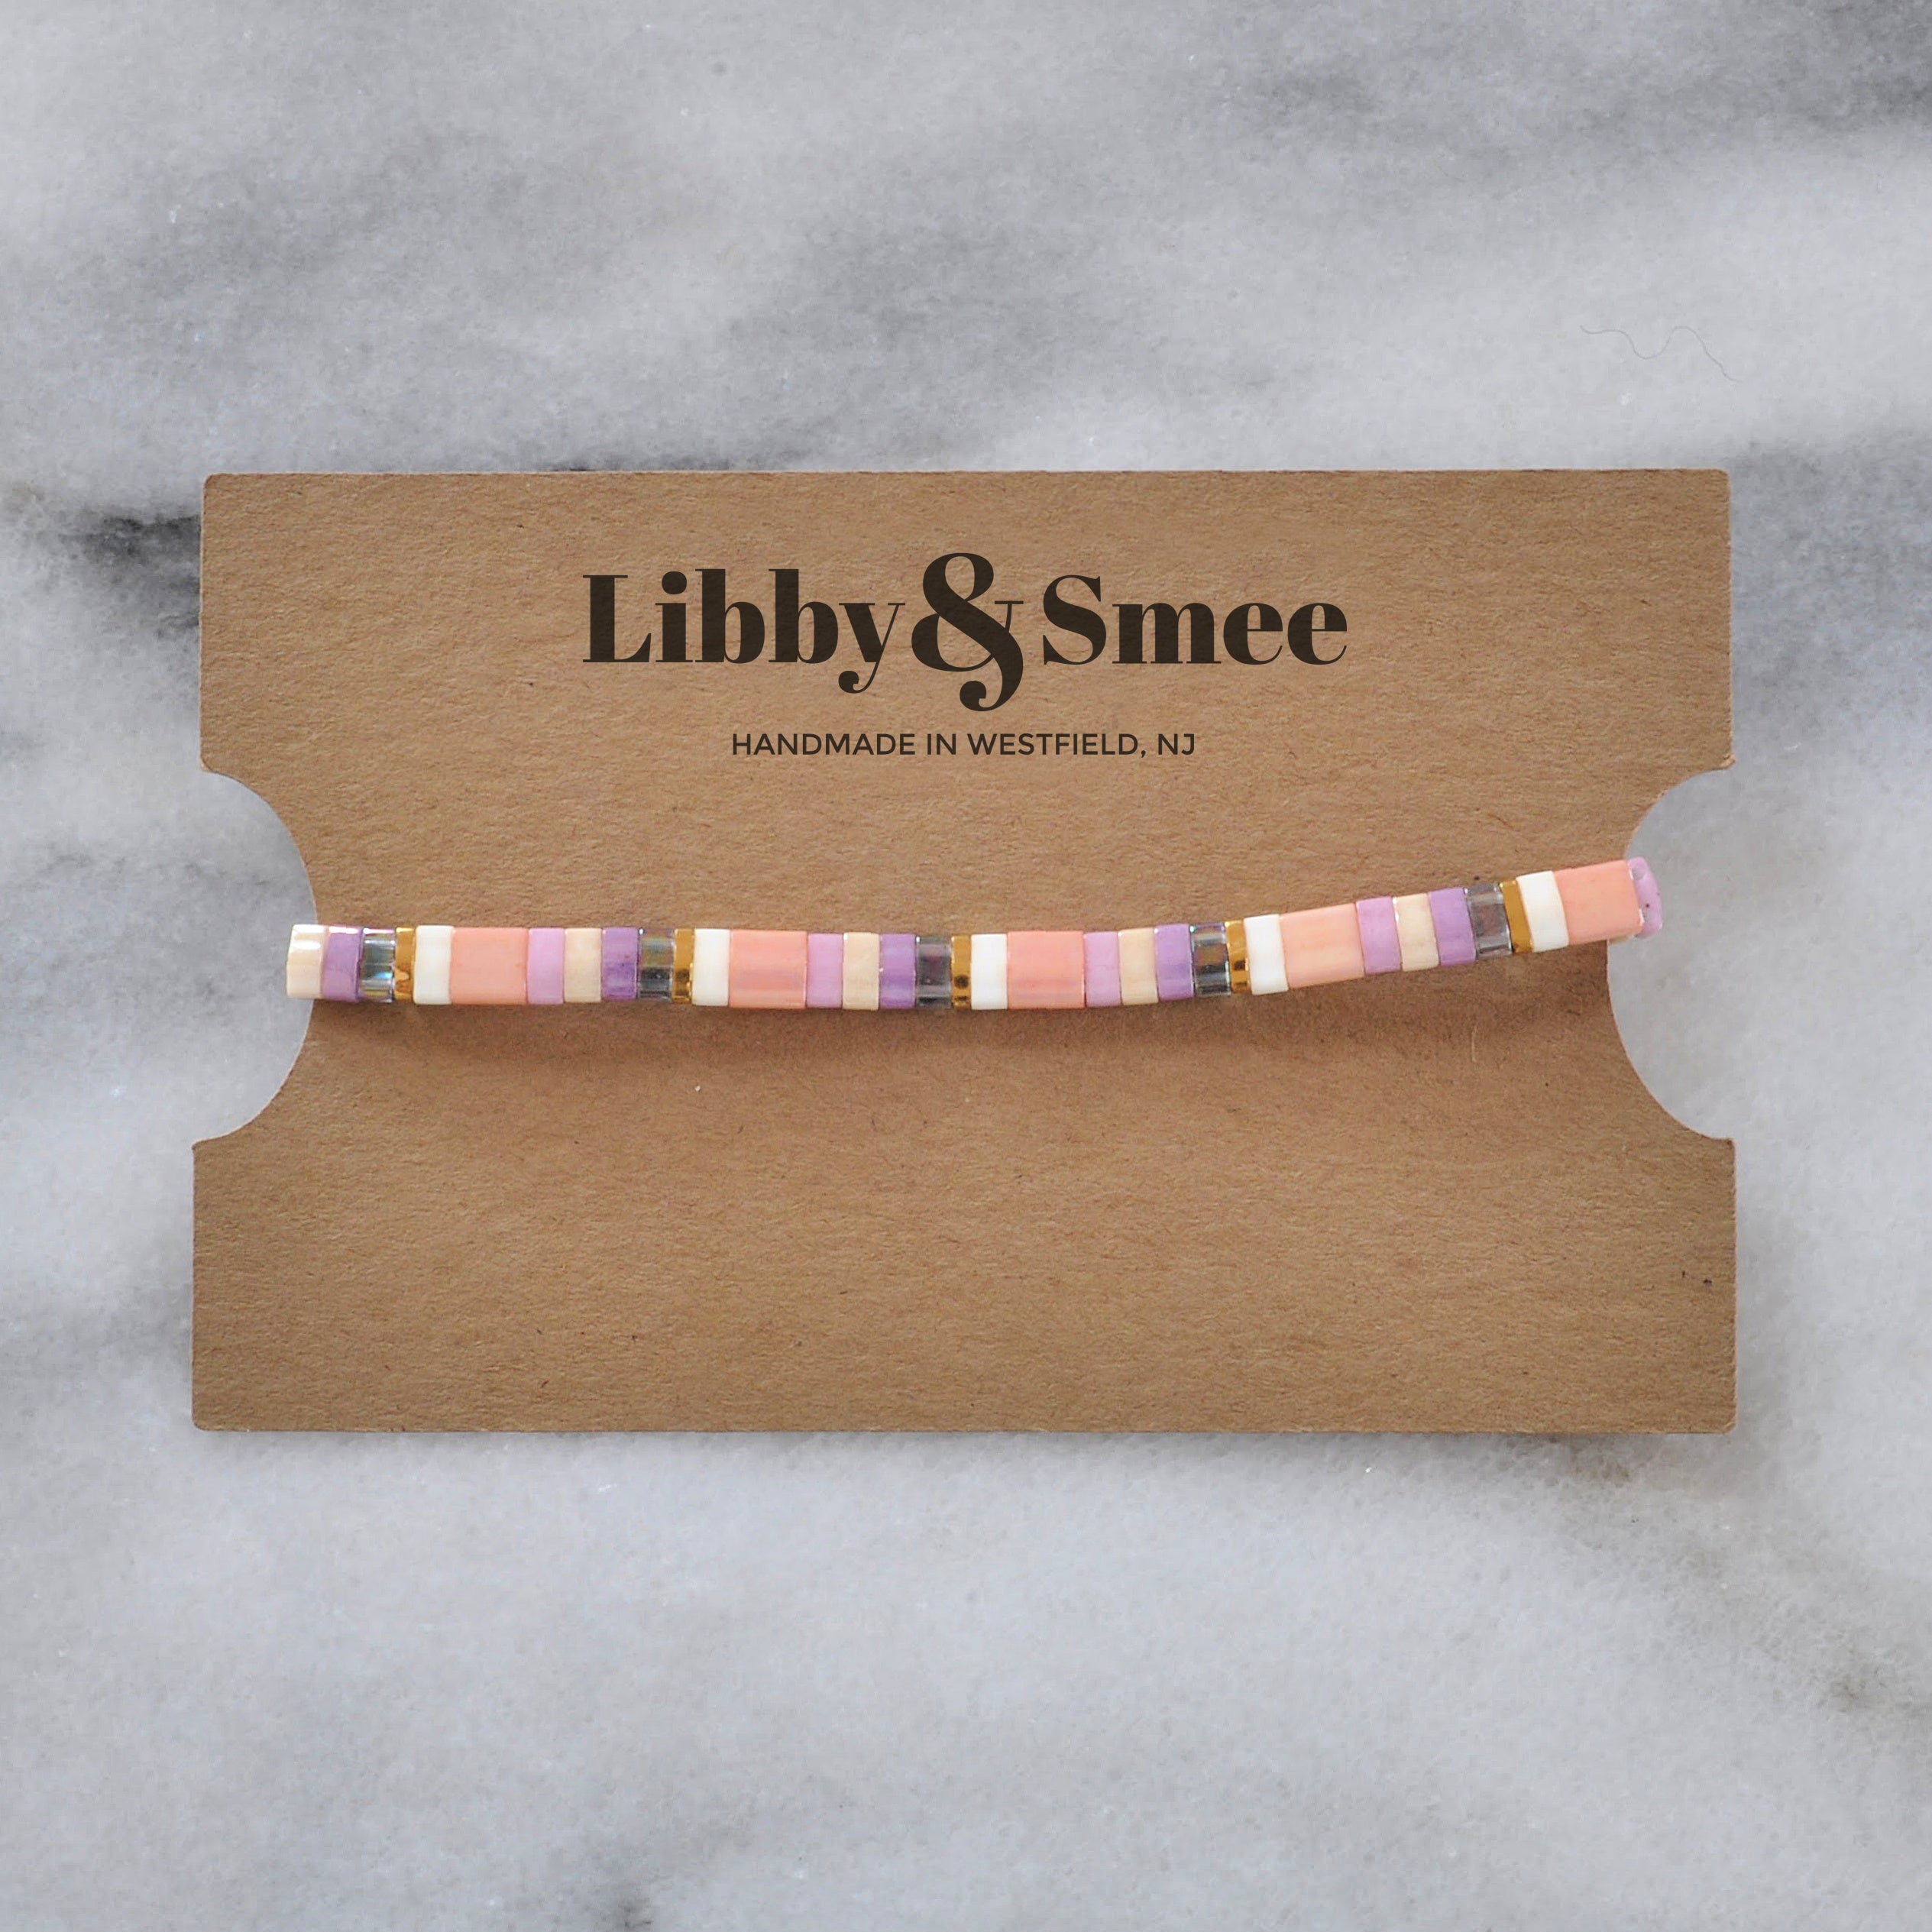 Libby & Smee stretch tile bracelet in Cotton Candy